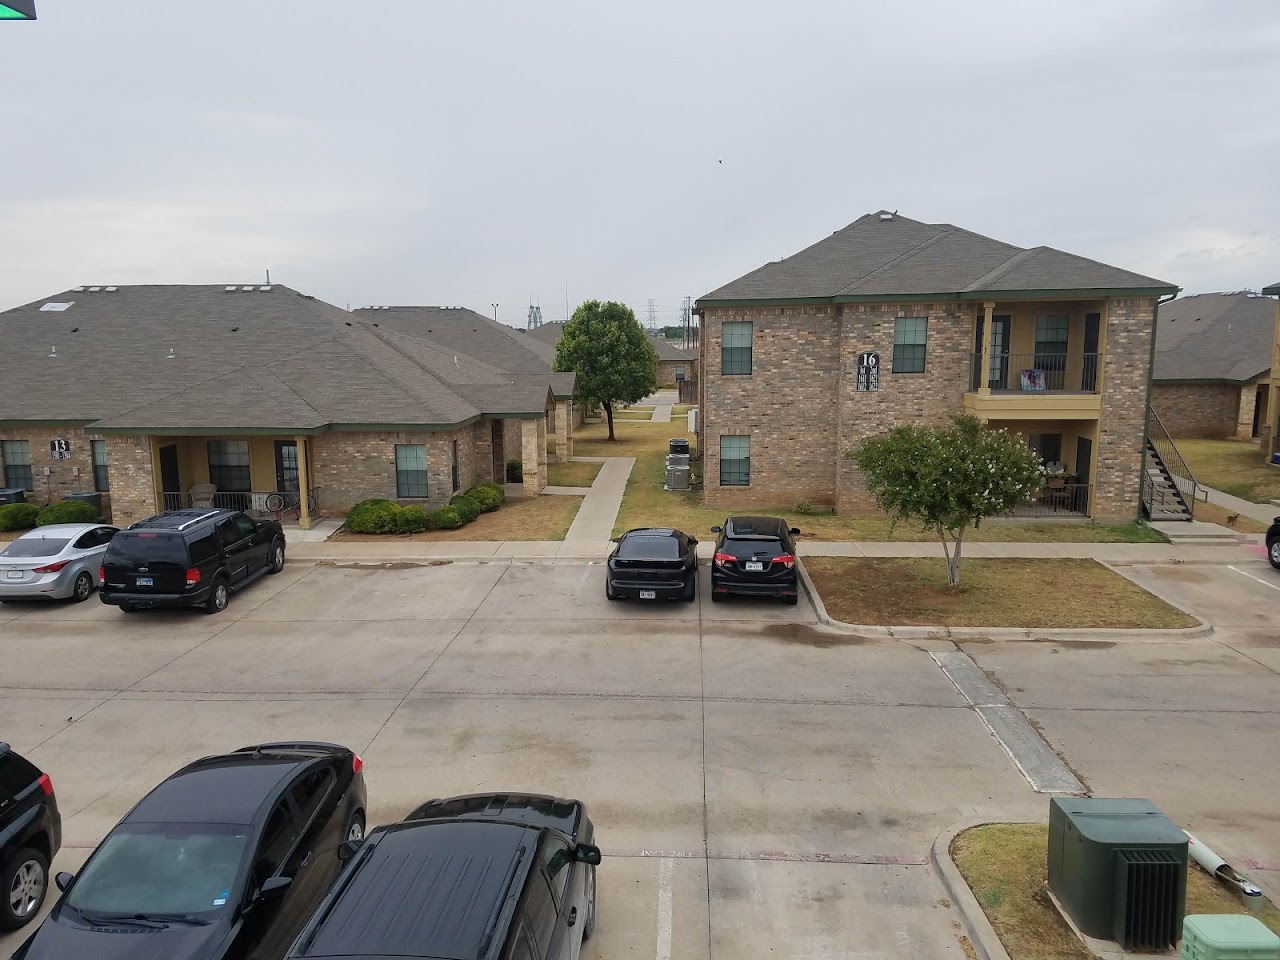 Photo of STERLING SPRINGS VILLAS at 1701 N FAIRGROUNDS RD MIDLAND, TX 79706